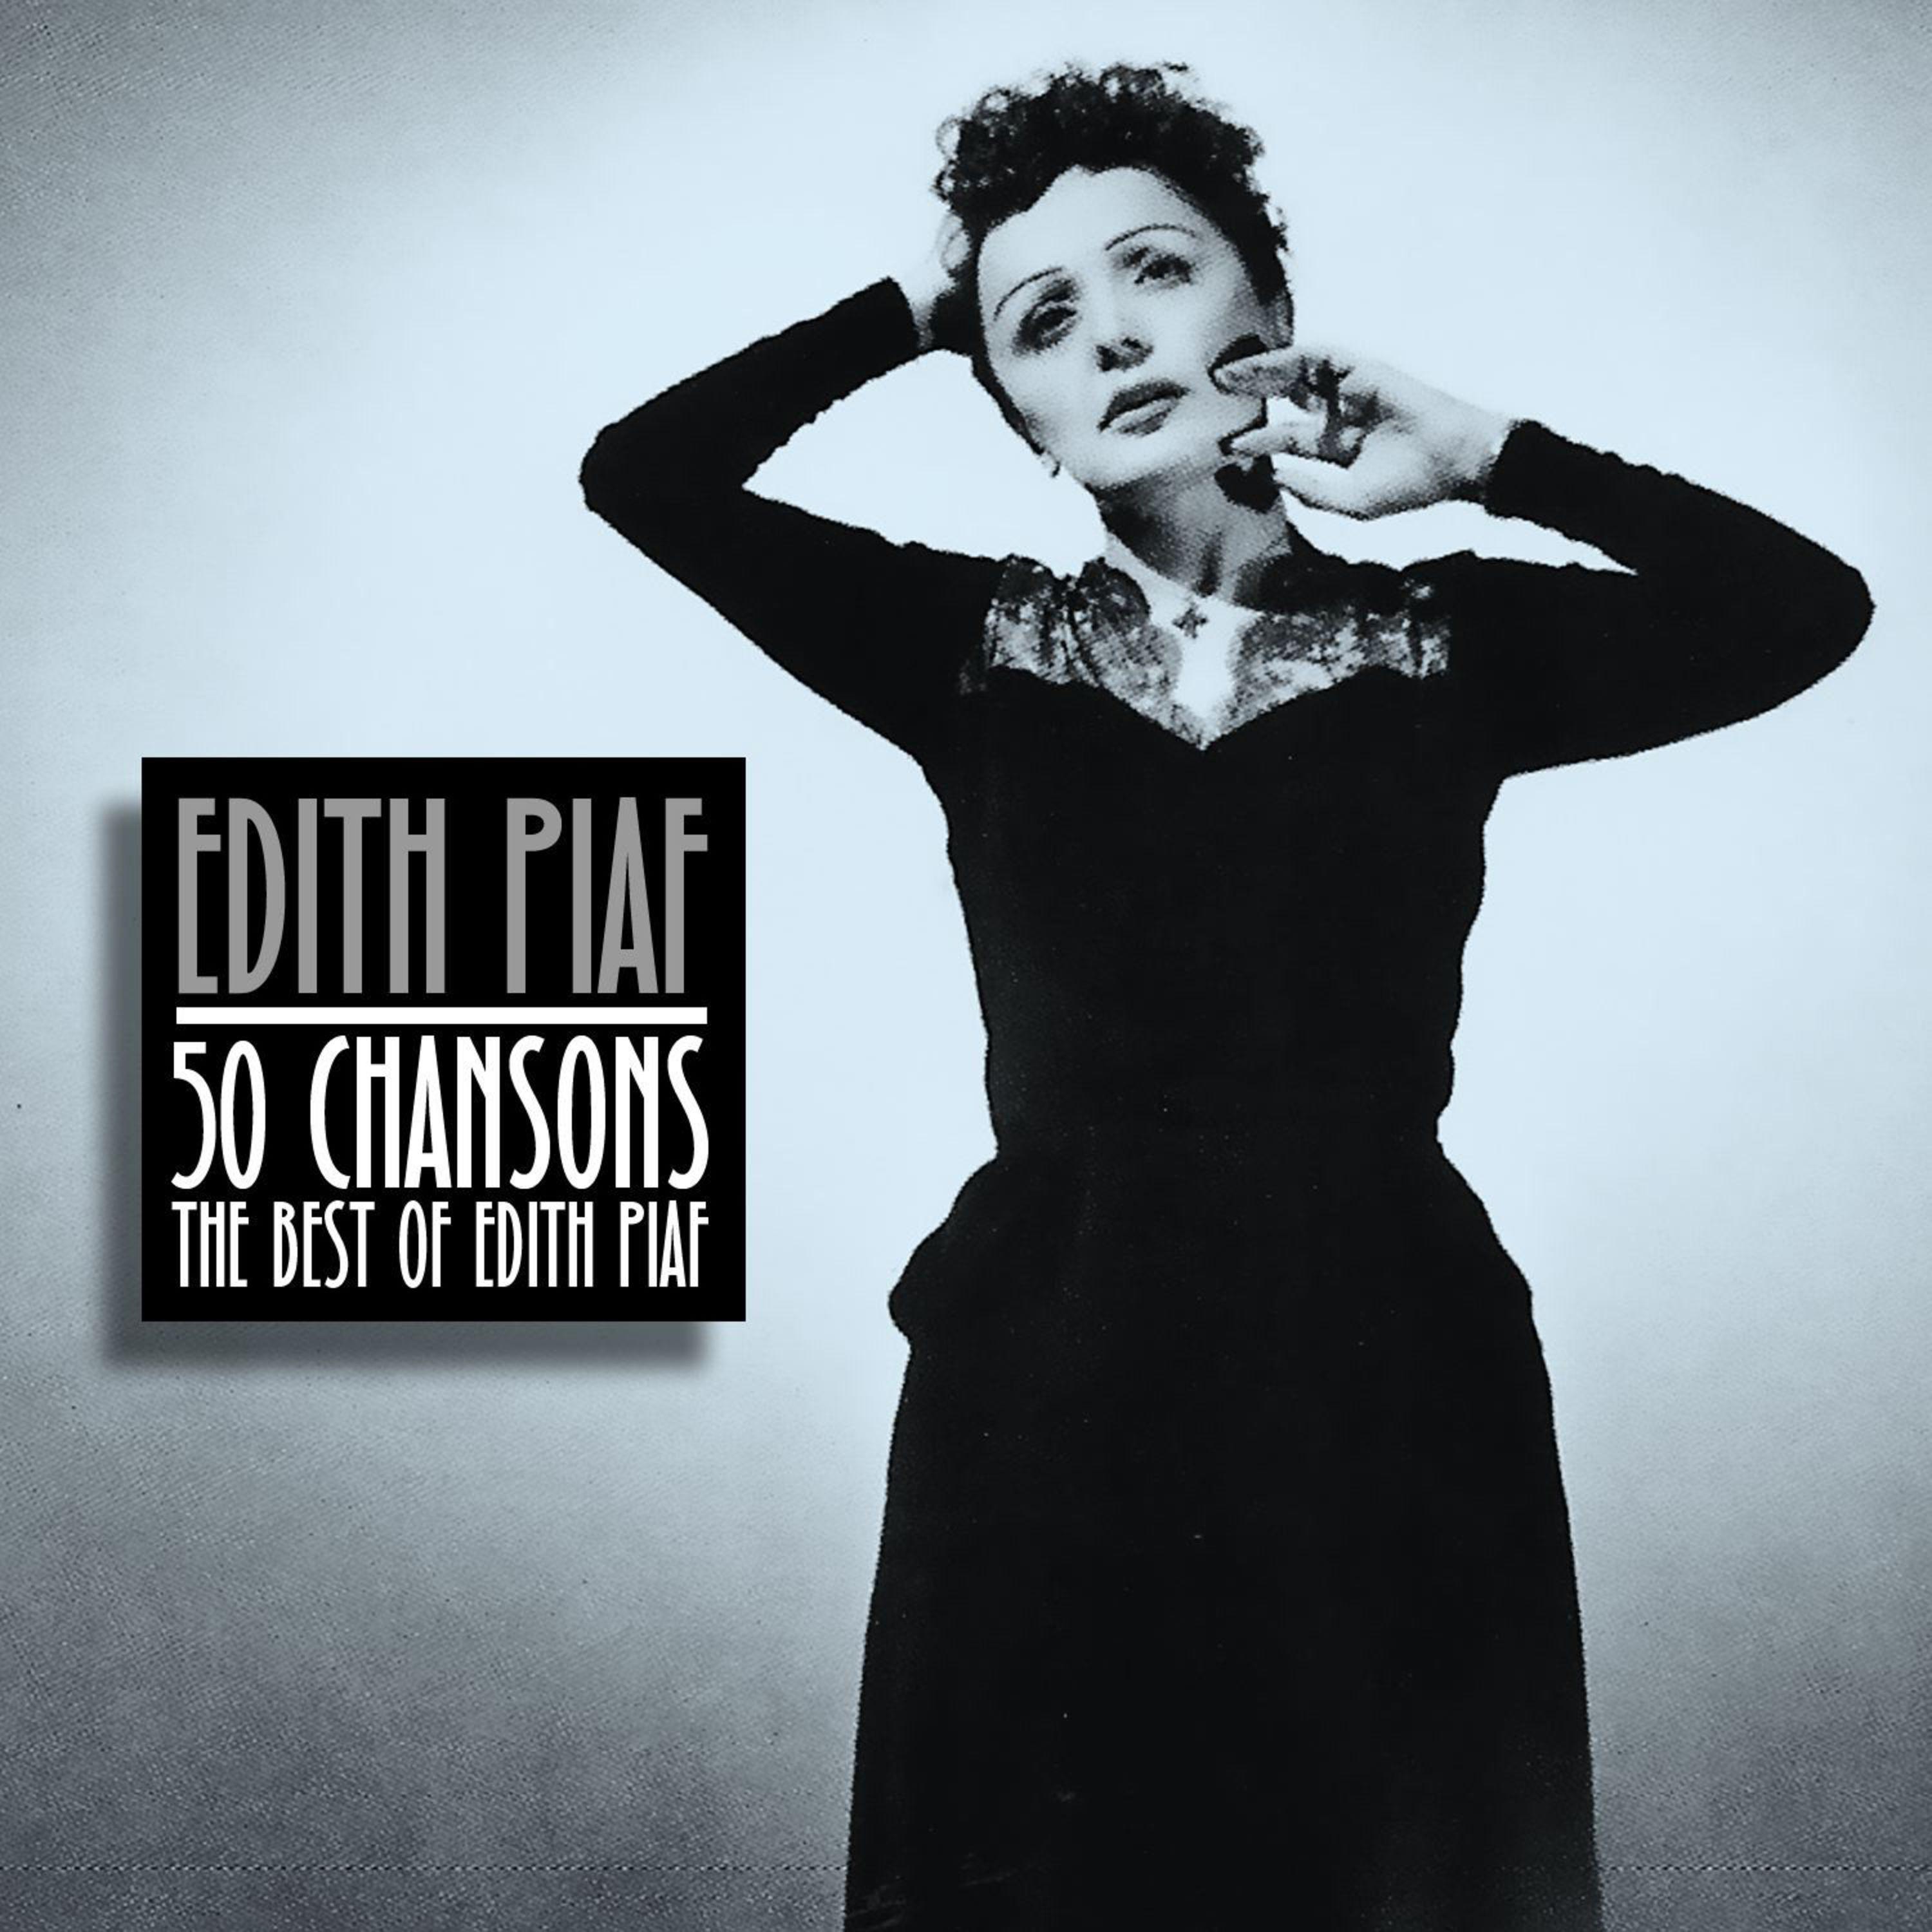 50 Chansons - The Best of Edith Piaf